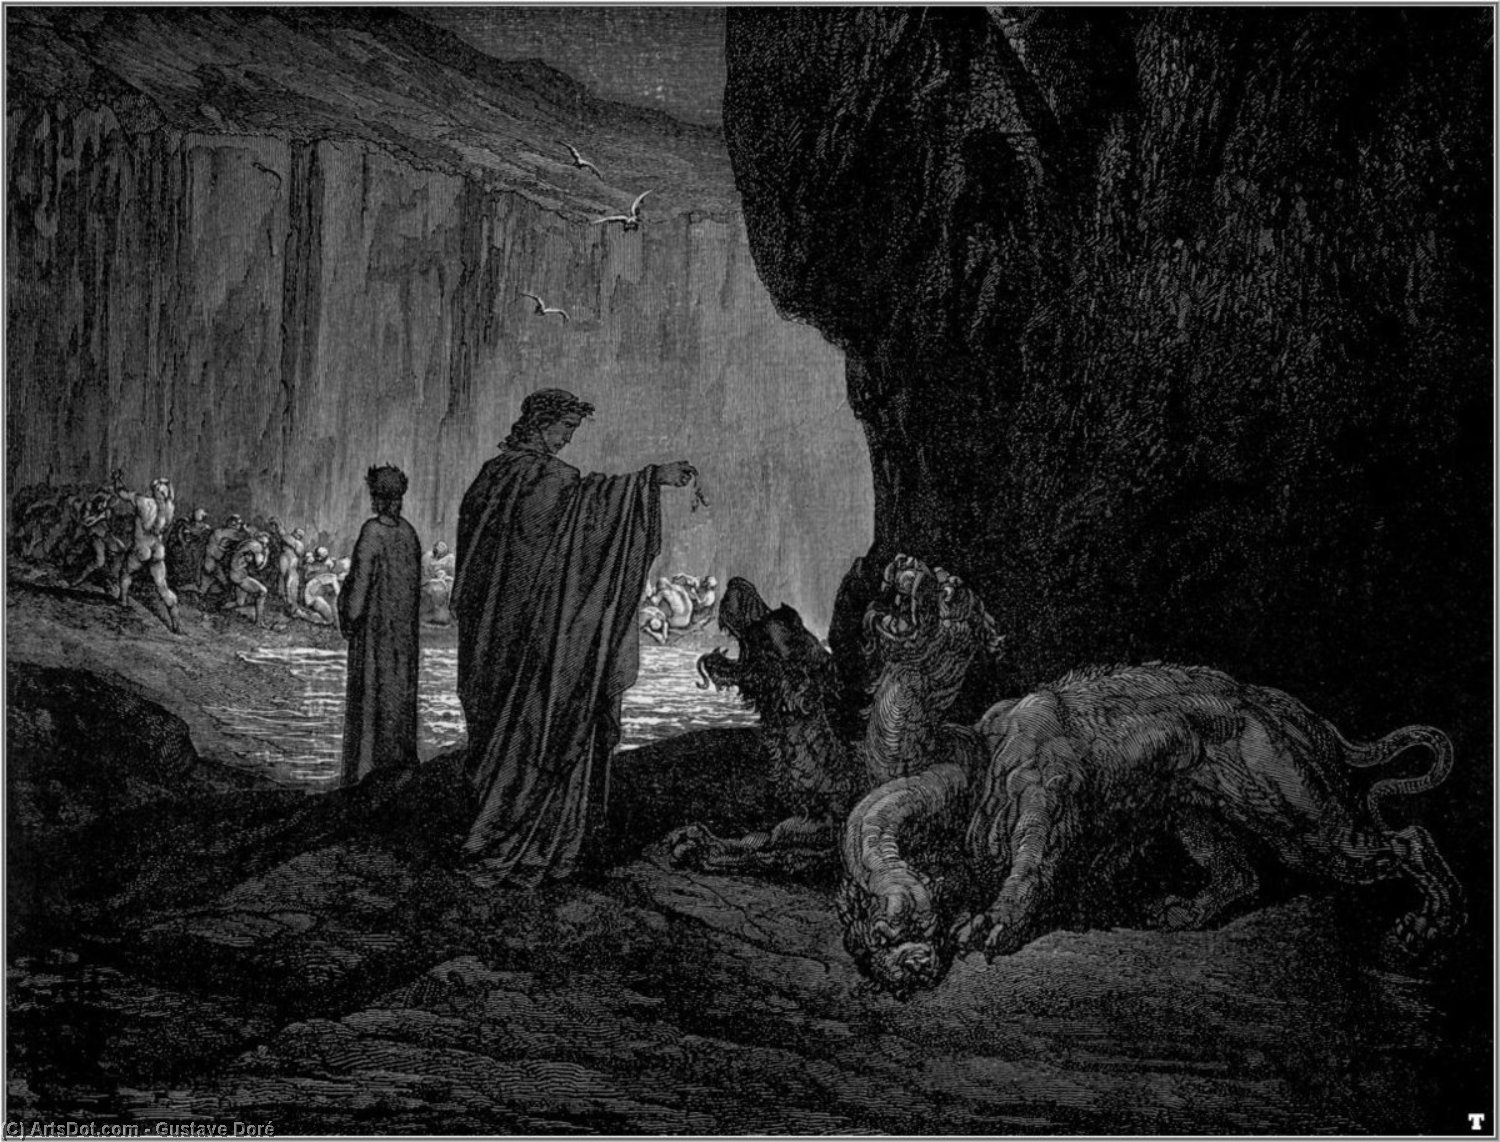 Wikioo.org - Bách khoa toàn thư về mỹ thuật - Vẽ tranh, Tác phẩm nghệ thuật Paul Gustave Doré - The Inferno, Canto 6, lines 24-26. Then my guide, his palms Expanding on the ground, thence filled with earth Rais’d them, and cast it in his ravenous maw.